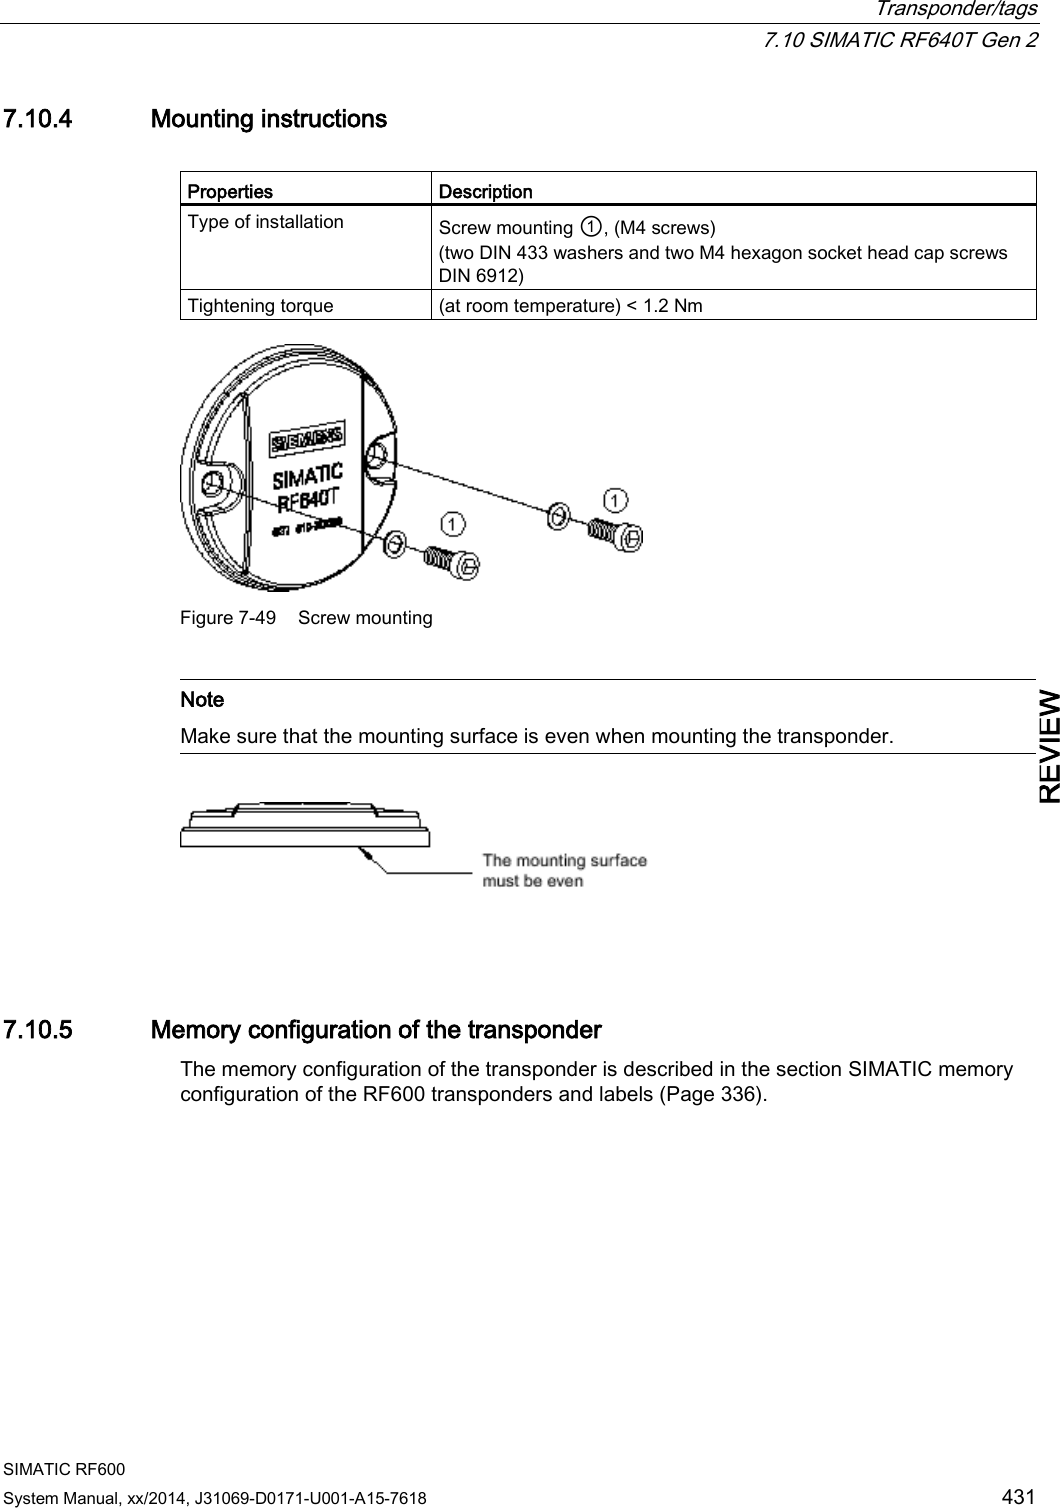  Transponder/tags  7.10 SIMATIC RF640T Gen 2 SIMATIC RF600 System Manual, xx/2014, J31069-D0171-U001-A15-7618 431 REVIEW 7.10.4 Mounting instructions  Properties Description Type of installation Screw mounting ①, (M4 screws) (two DIN 433 washers and two M4 hexagon socket head cap screws DIN 6912) Tightening torque (at room temperature) &lt; 1.2 Nm  Figure 7-49 Screw mounting   Note Make sure that the mounting surface is even when mounting the transponder.    7.10.5 Memory configuration of the transponder The memory configuration of the transponder is described in the section SIMATIC memory configuration of the RF600 transponders and labels (Page 336). 